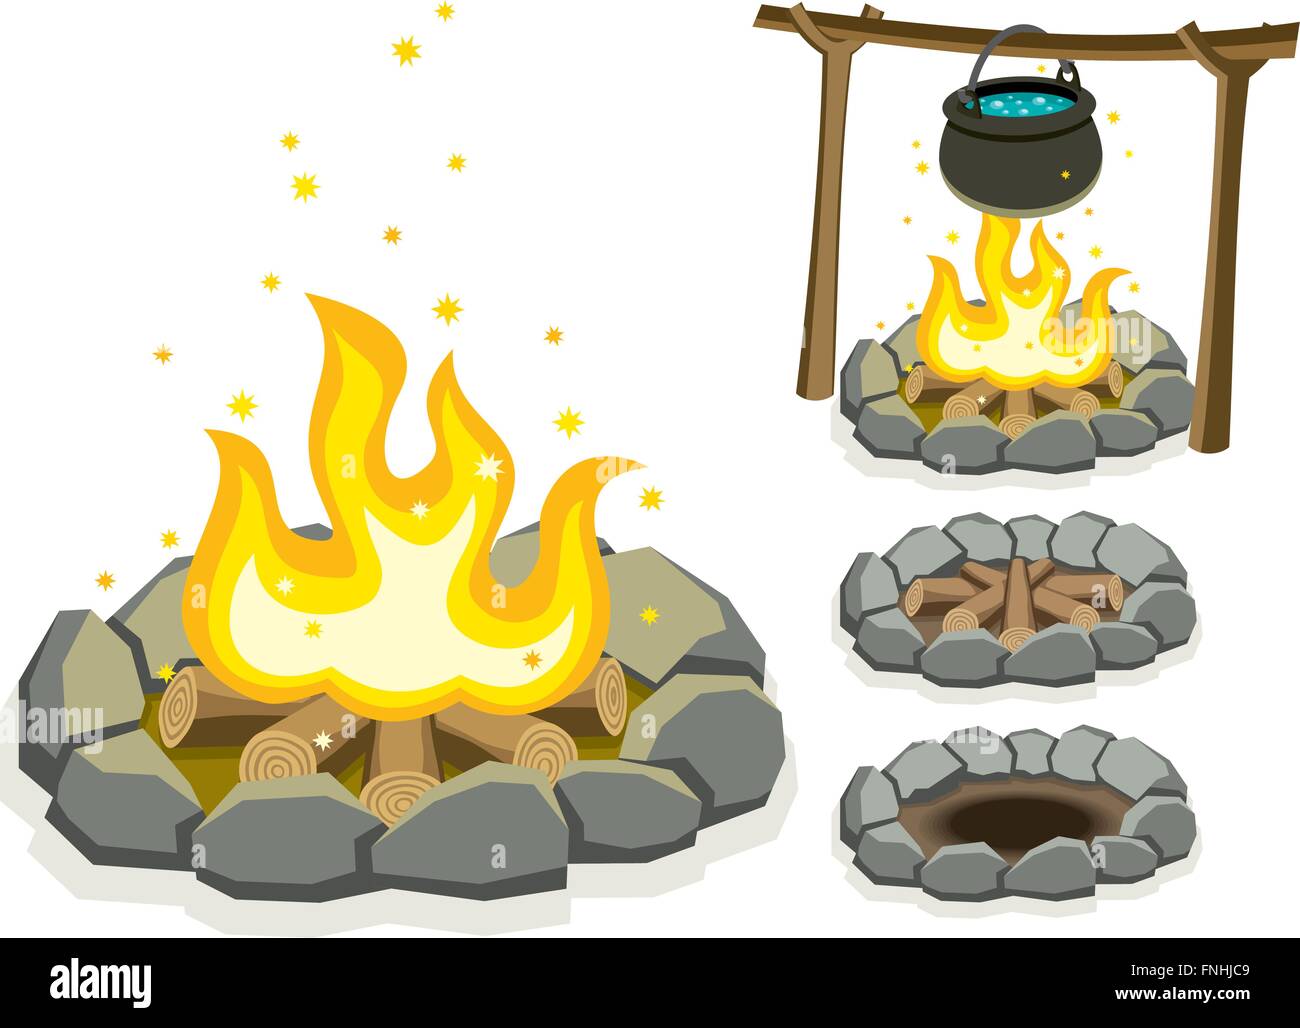 Cartoon illustration of campfire in 4 different situations. Stock Vector